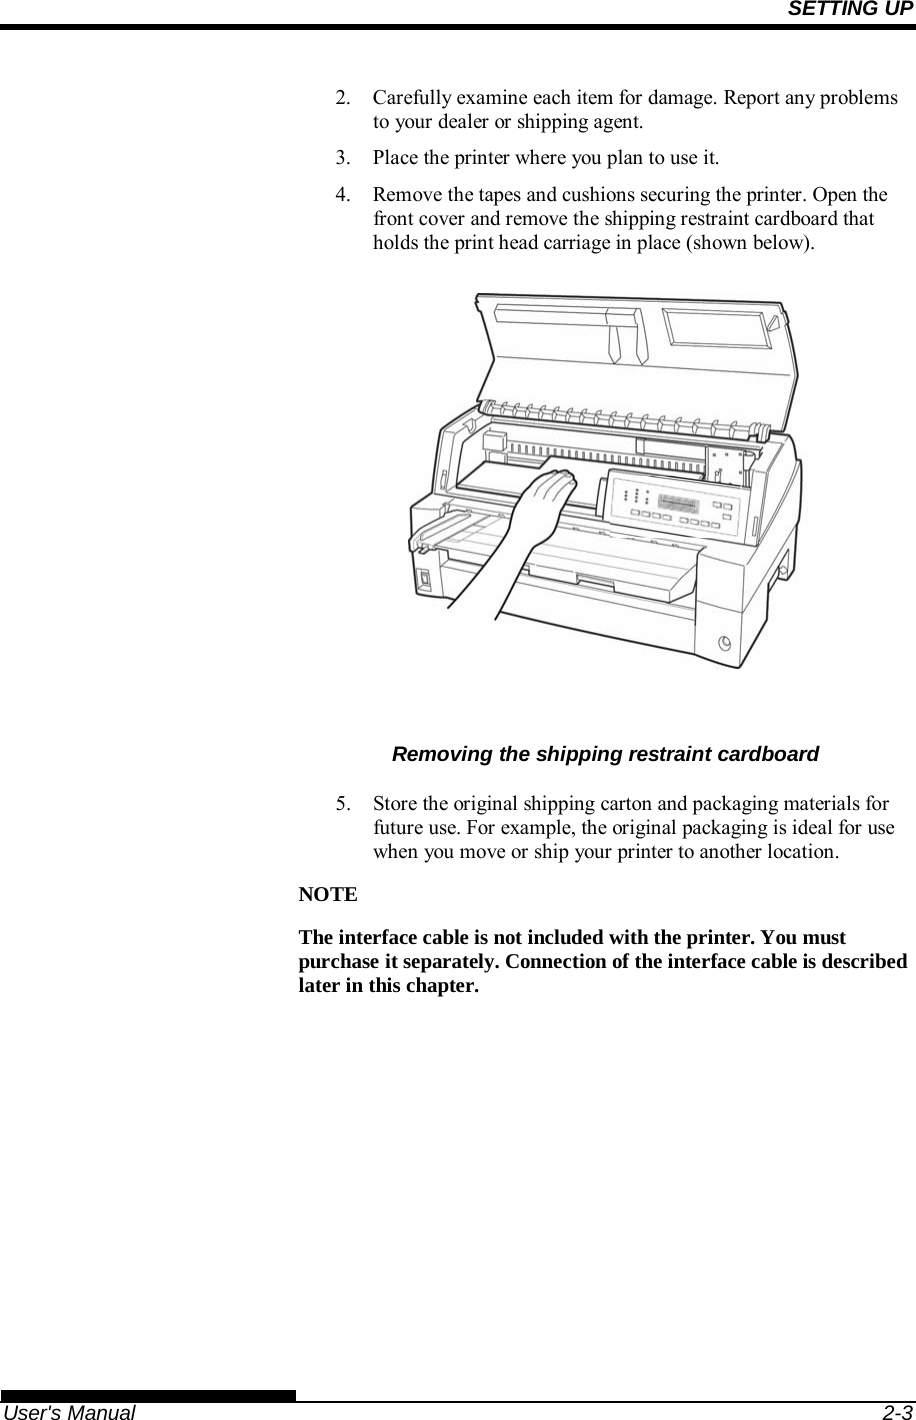 SETTING UP   User&apos;s Manual  2-3 2.  Carefully examine each item for damage. Report any problems to your dealer or shipping agent. 3.  Place the printer where you plan to use it. 4.  Remove the tapes and cushions securing the printer. Open the front cover and remove the shipping restraint cardboard that holds the print head carriage in place (shown below).            Removing the shipping restraint cardboard  5.  Store the original shipping carton and packaging materials for future use. For example, the original packaging is ideal for use when you move or ship your printer to another location. NOTE The interface cable is not included with the printer. You must purchase it separately. Connection of the interface cable is described later in this chapter.  